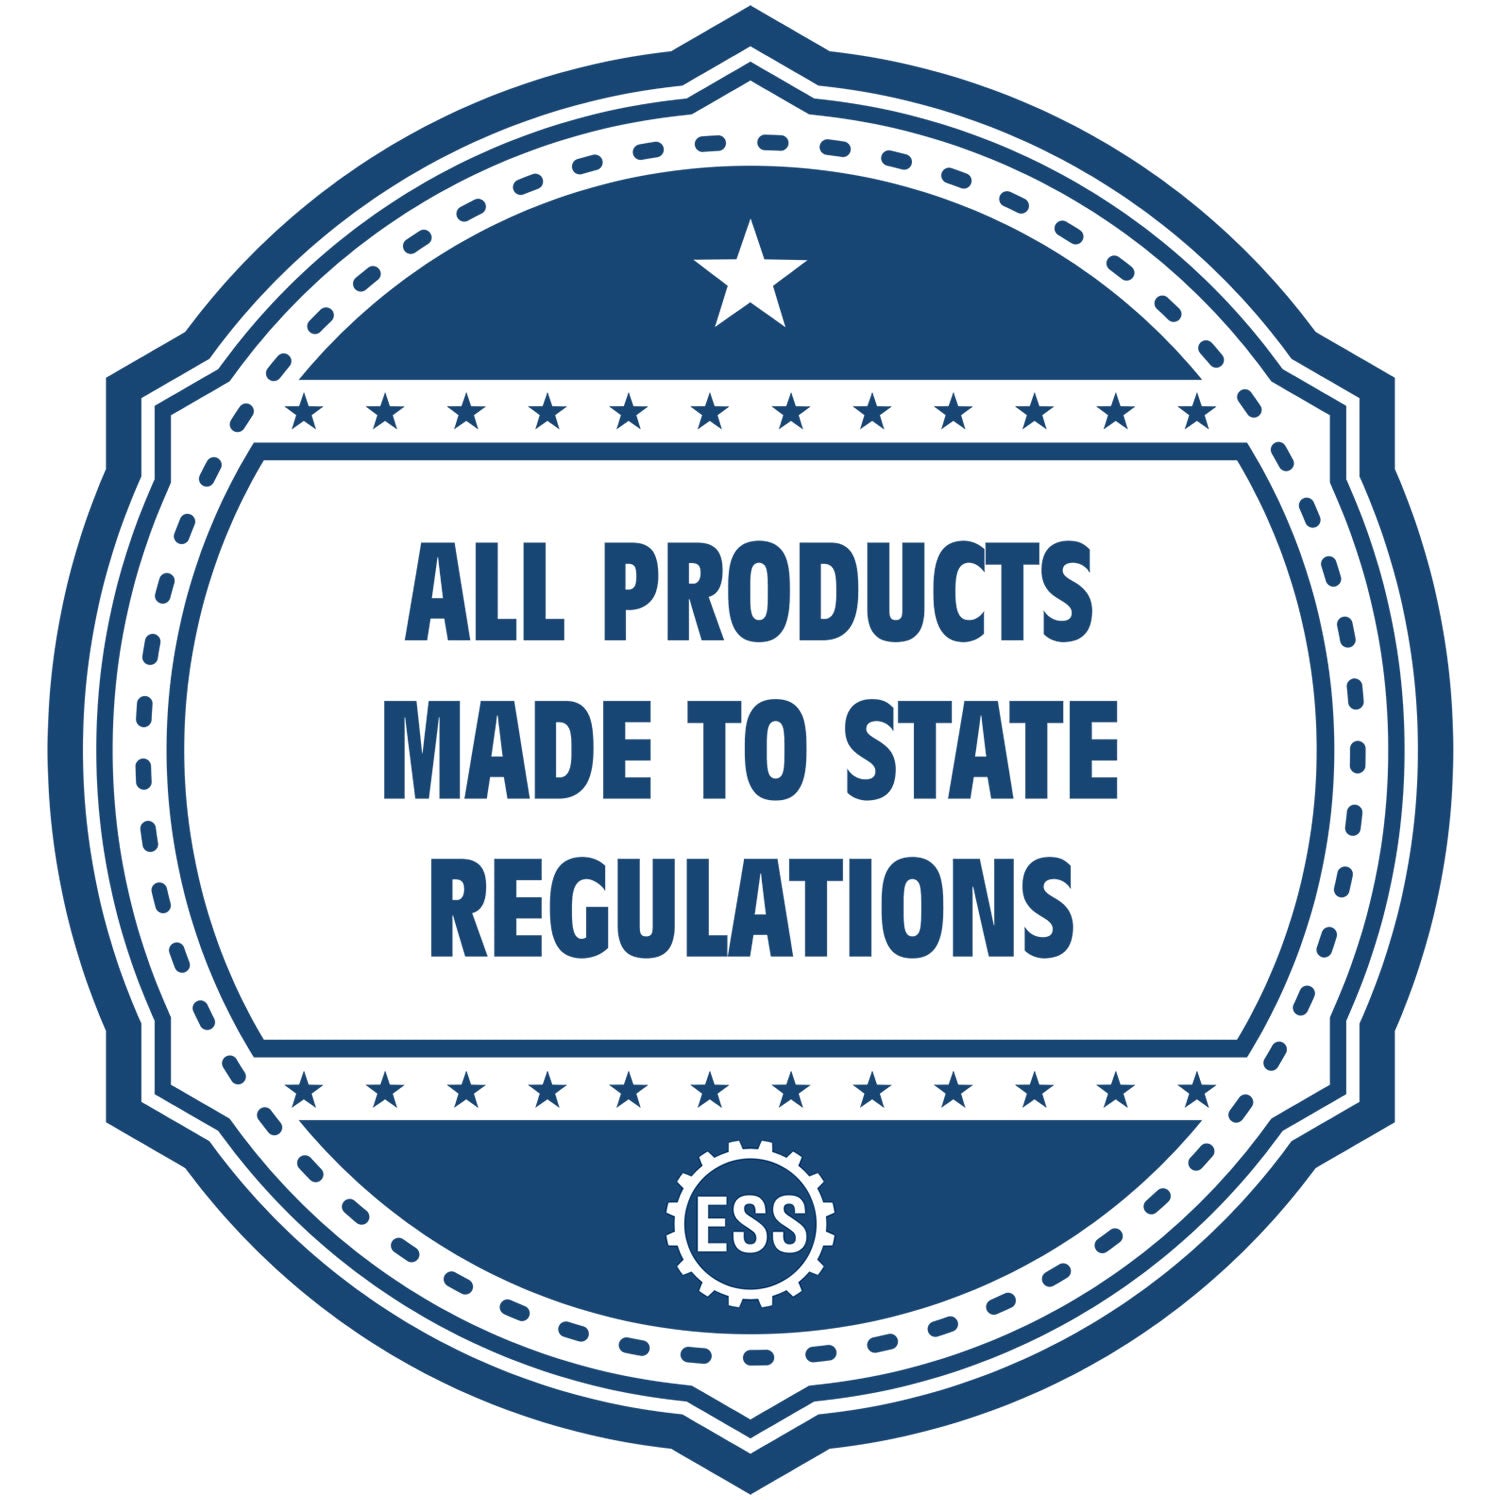 An icon or badge element for the State of Arkansas Long Reach Architectural Embossing Seal showing that this product is made in compliance with state regulations.